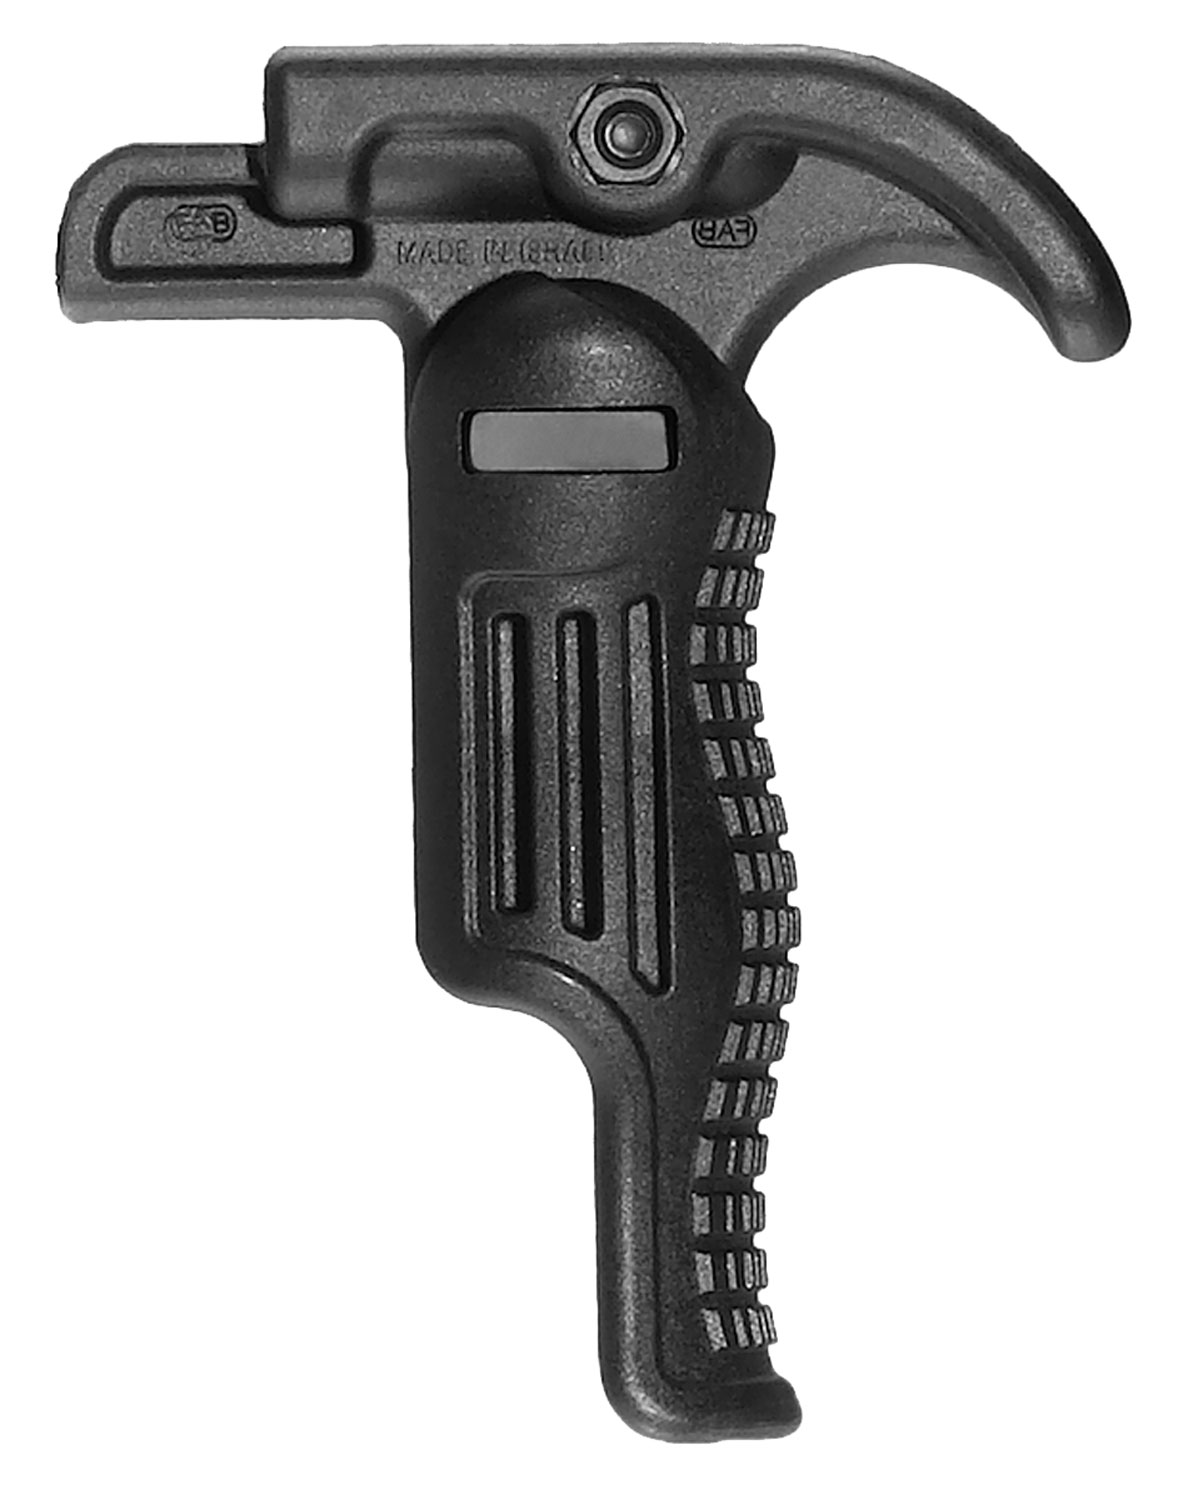 FAB Defense FXFGGSB Tactical Foregrip Folding Made of Polymer With Black Finish for Rifle, Pistols